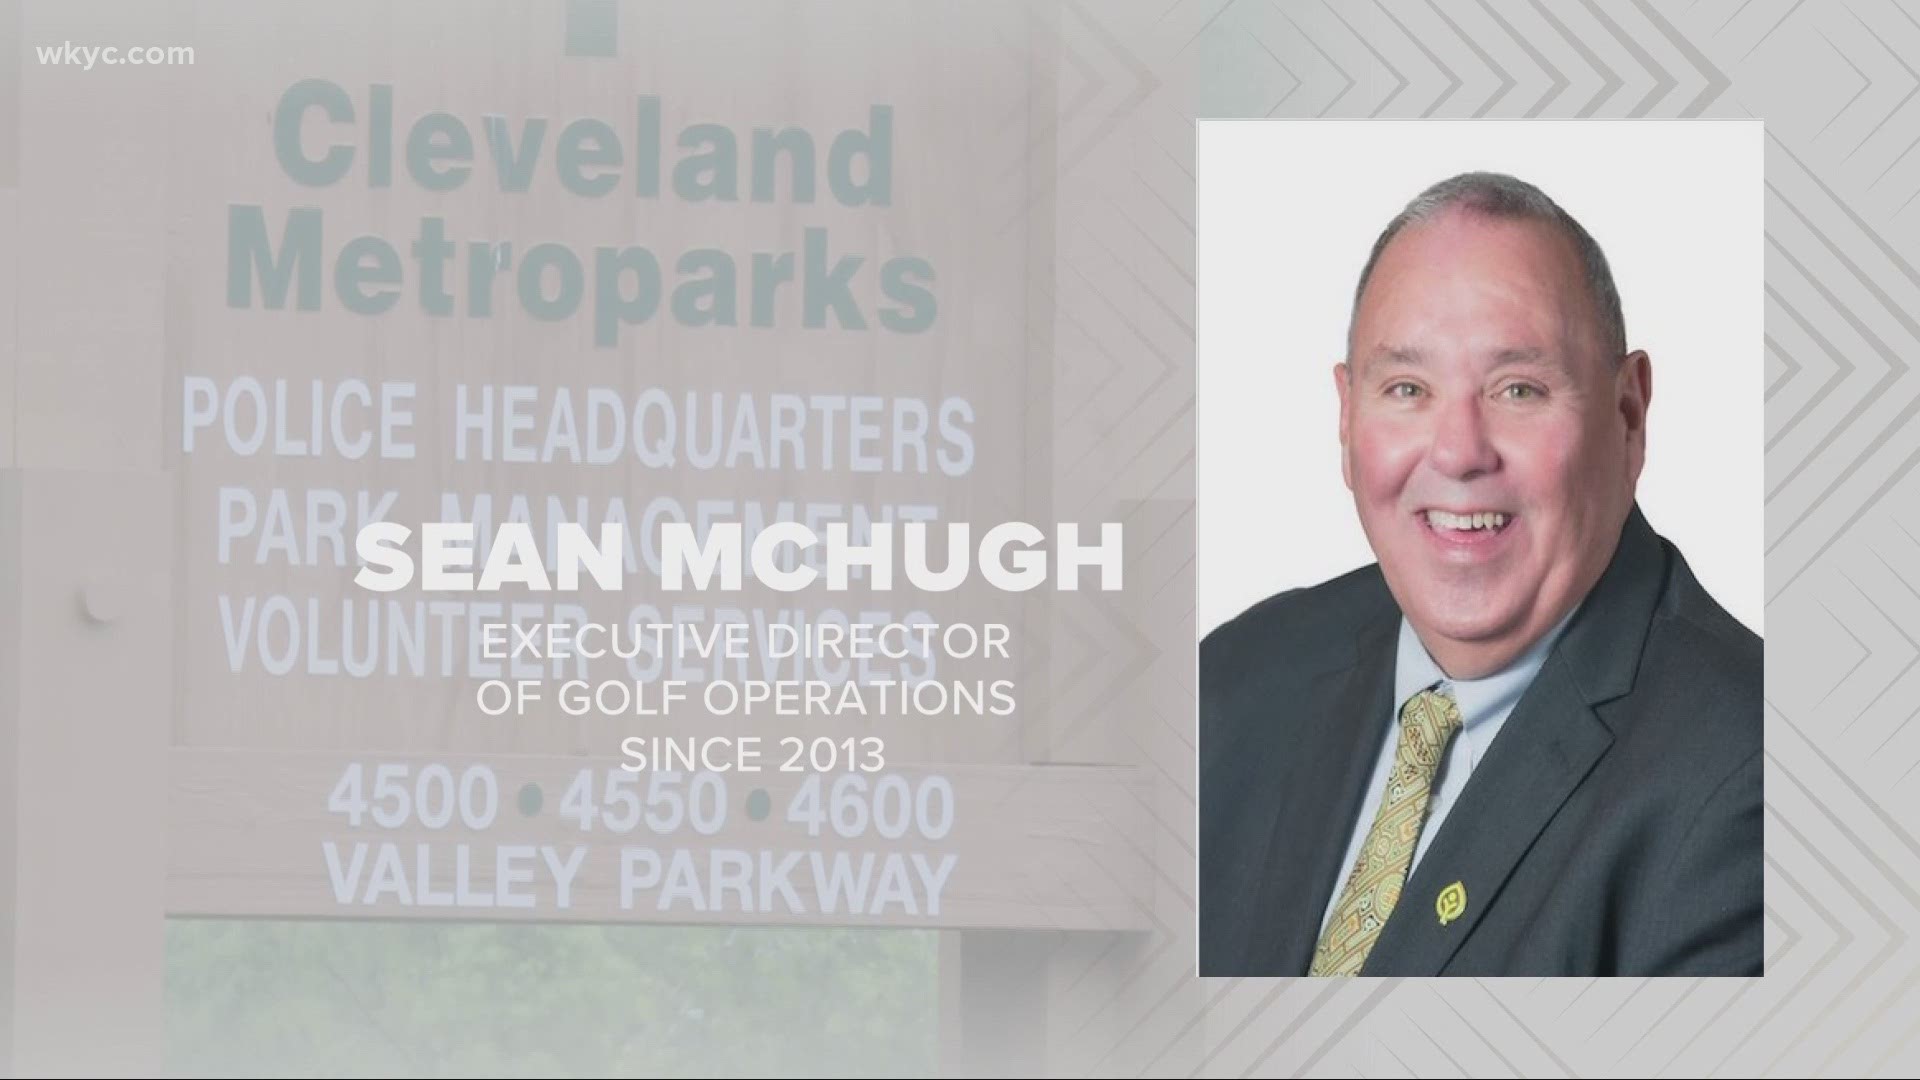 Last month, 3News revealed that the man in charge of the Metroparks' golf courses lied about his qualifications. It turns out, that the Metroparks missed warnings.